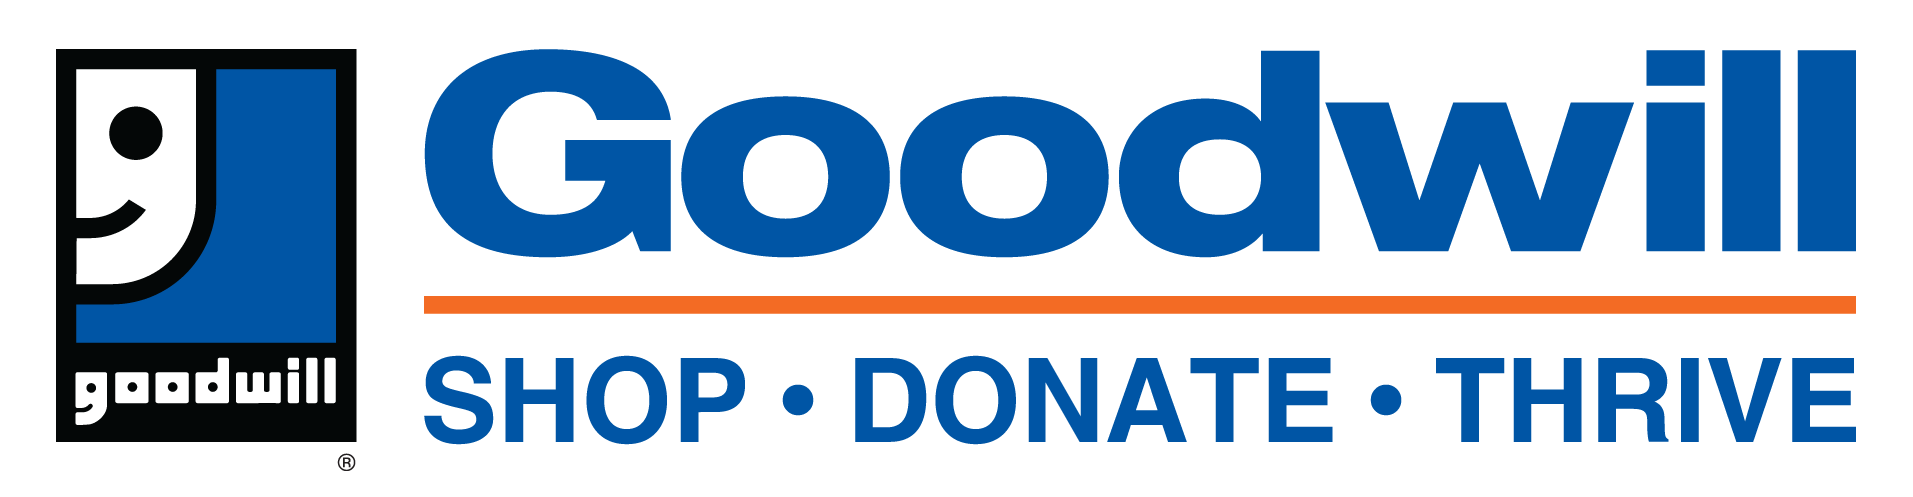 Goodwill_Shop-Donate-Thrive